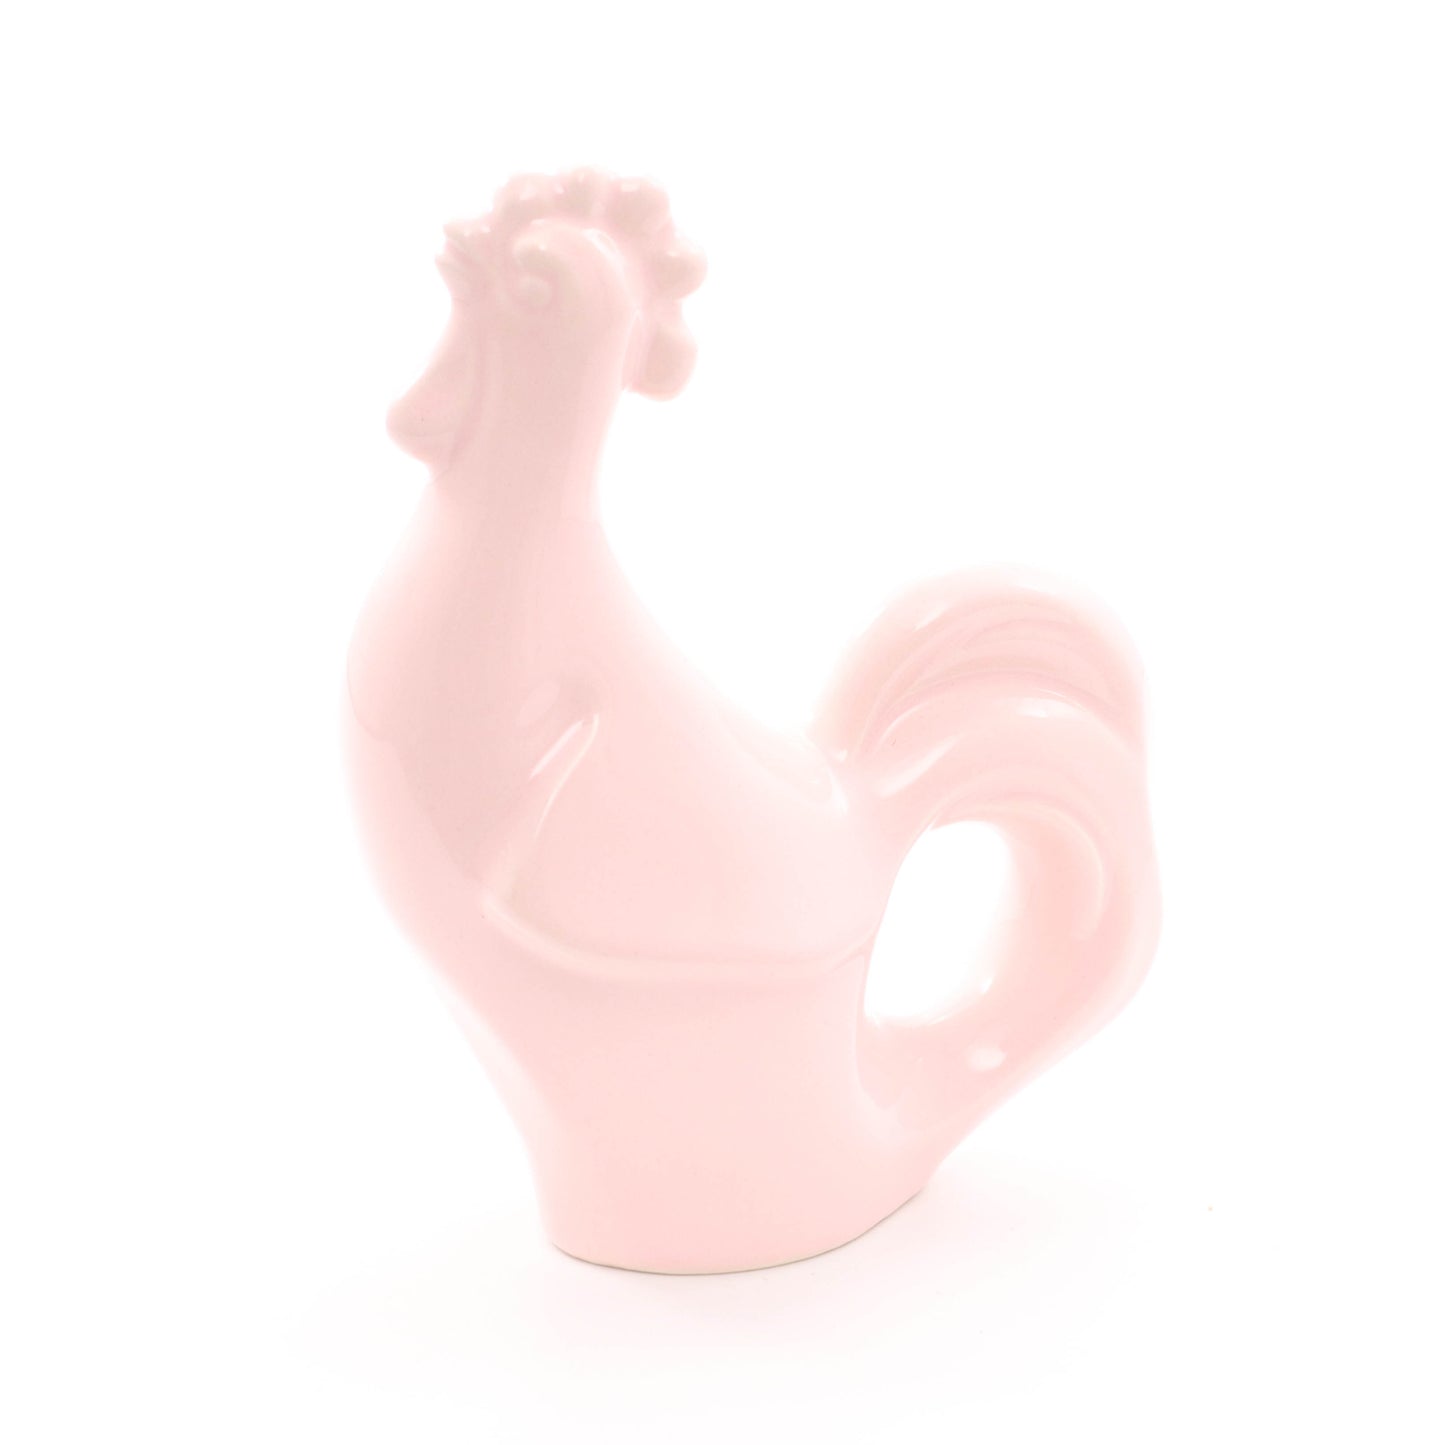 2"x4"x7" Rooster Figurine. Pattern: Pink